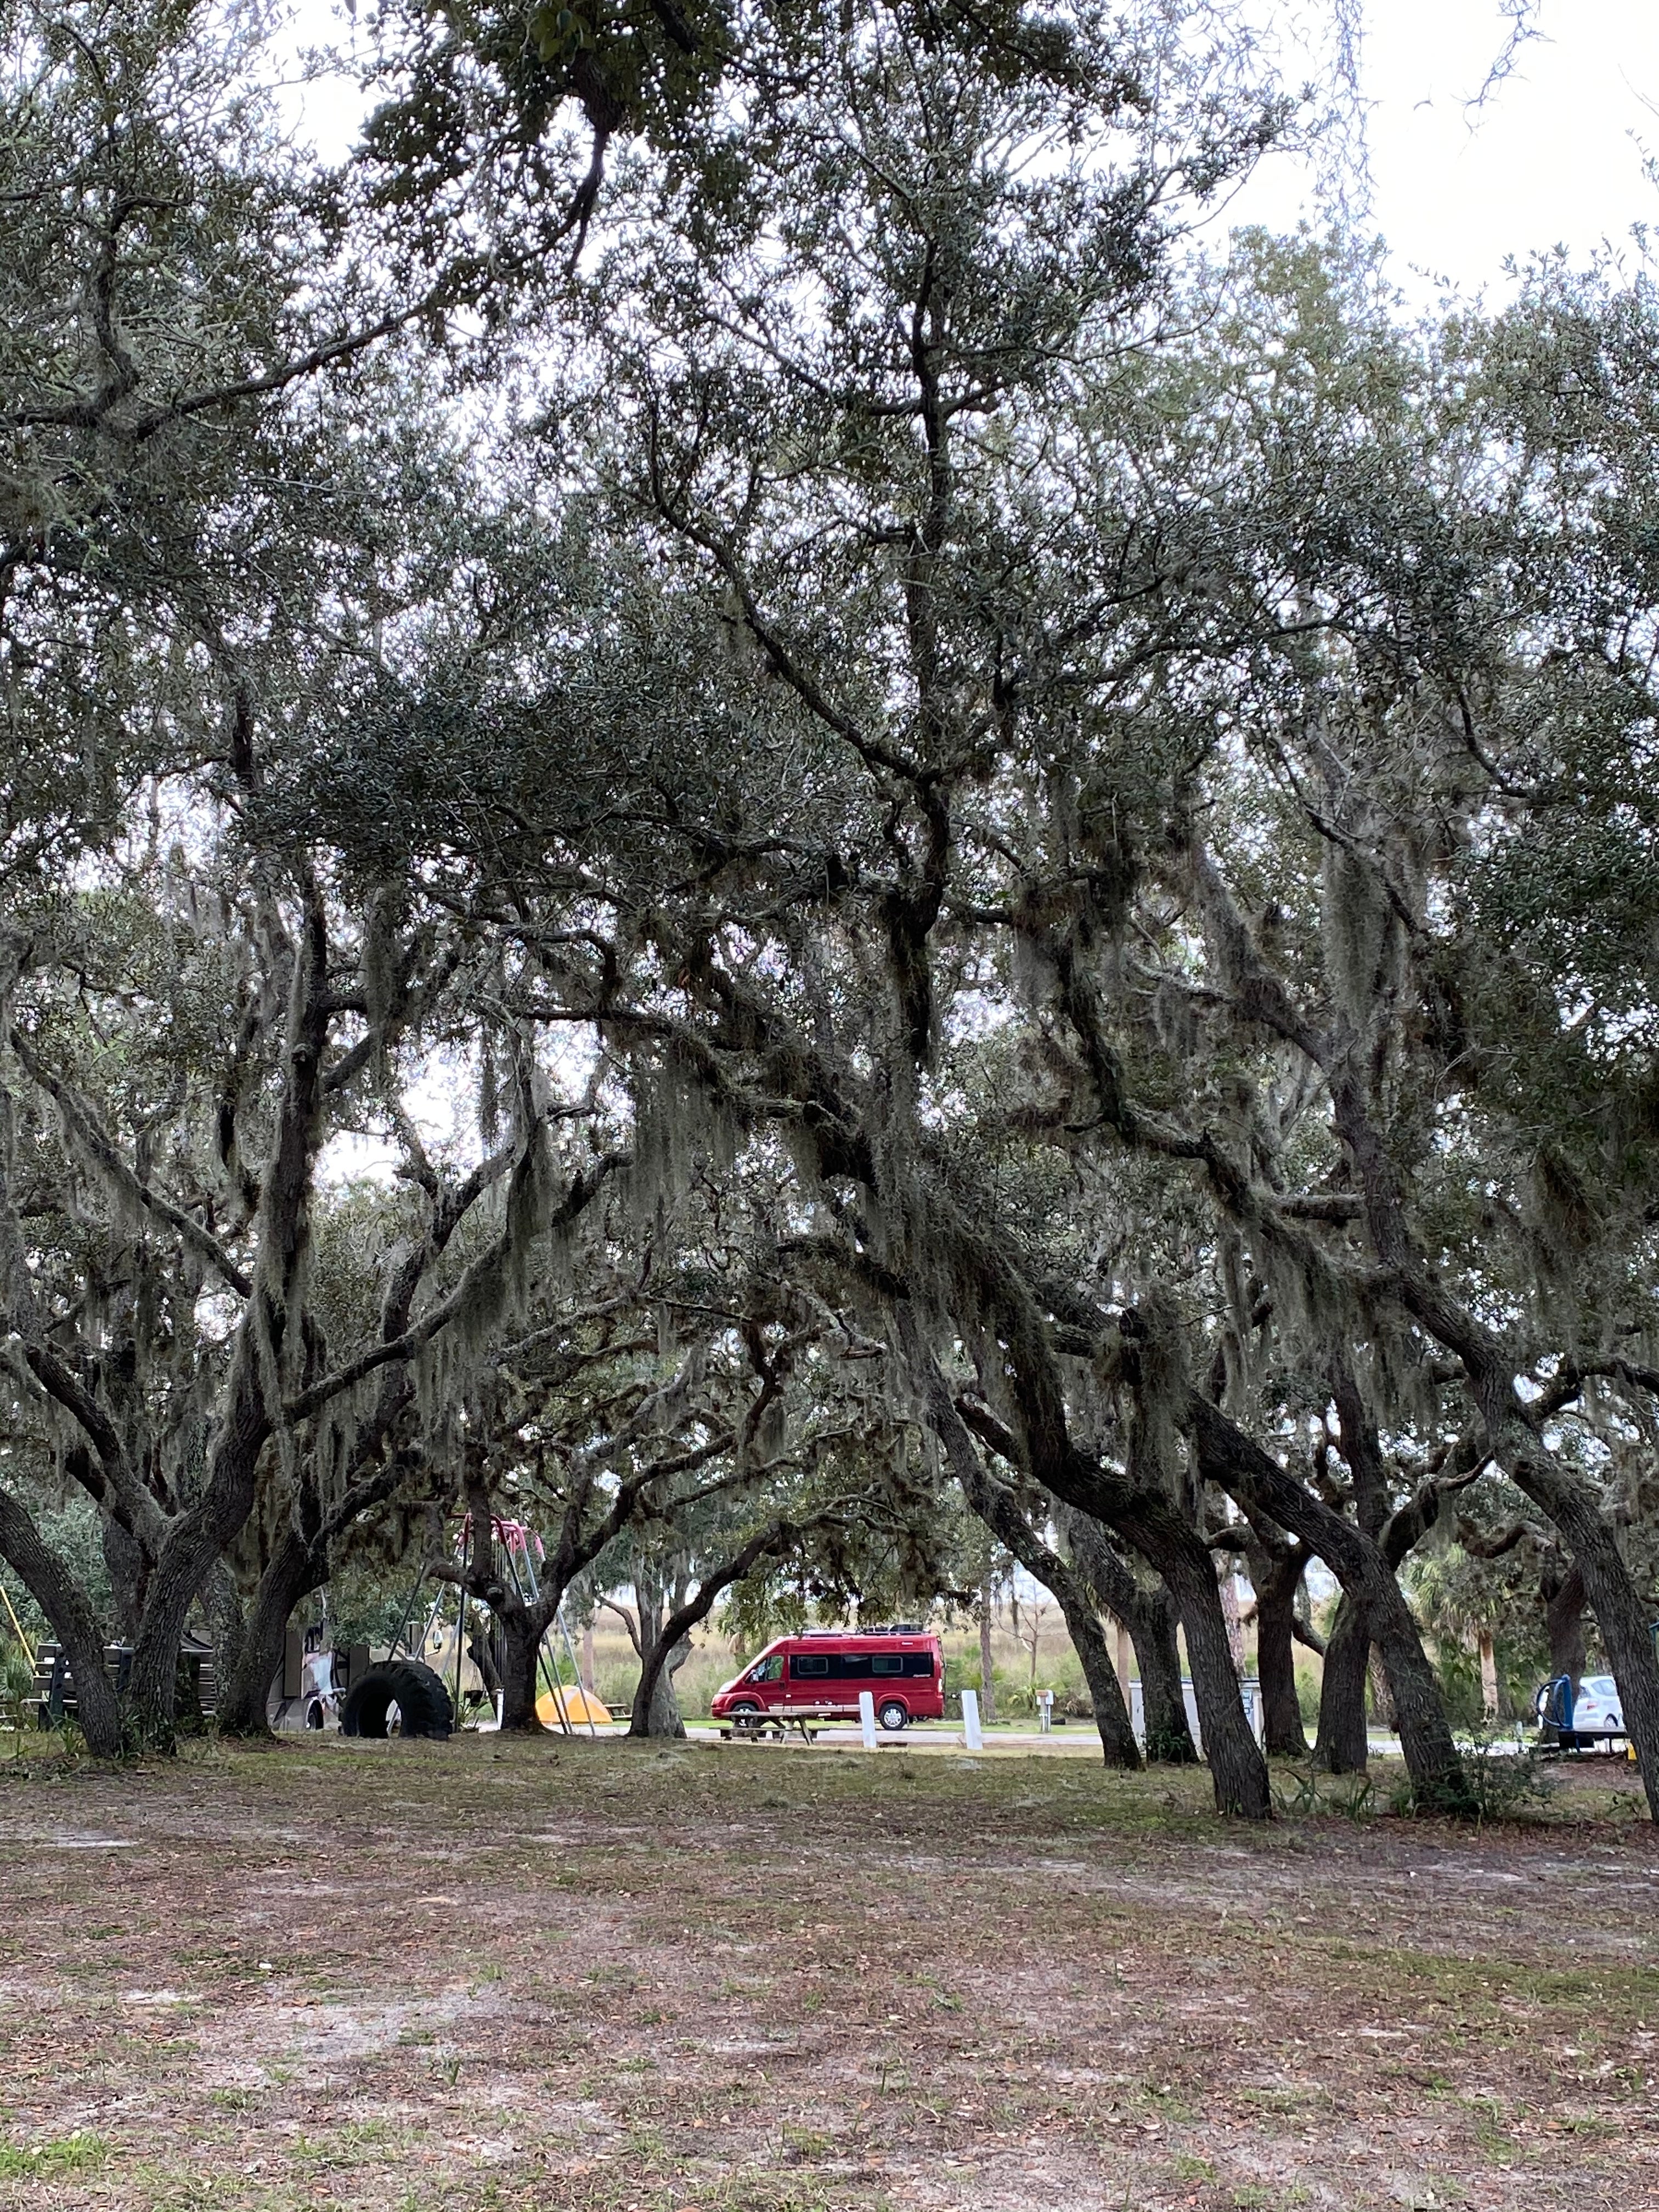 Cool live oaks in the campground